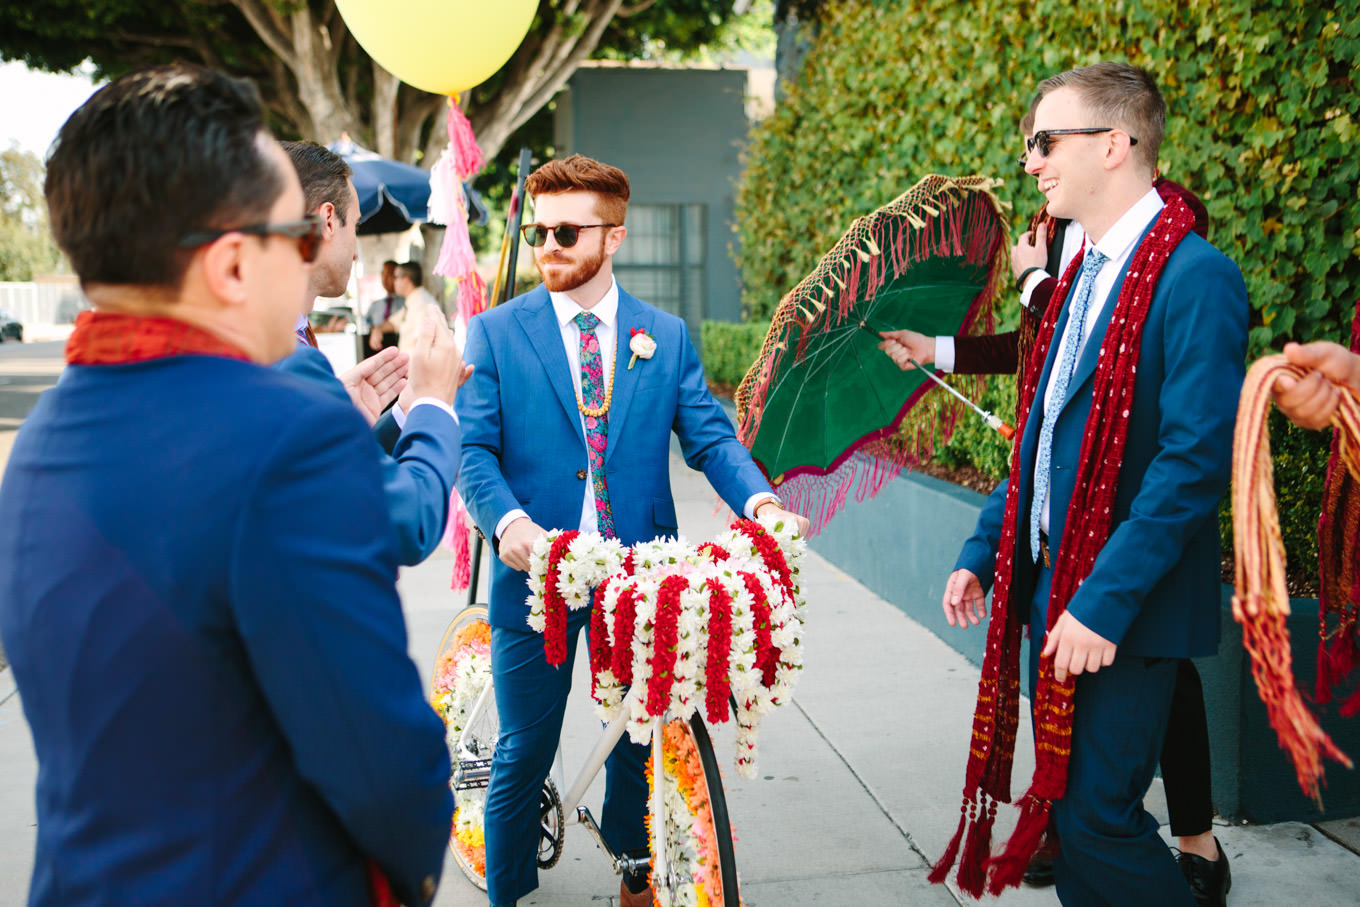 Groom riding into wedding ceremony on white Baraat bicycle. Two Disney artists create a unique and colorful Indian Fusion wedding at The Fig House Los Angeles, featured on Green Wedding Shoes. | Colorful and elevated wedding inspiration for fun-loving couples in Southern California | #indianwedding #indianfusionwedding #thefighouse #losangeleswedding   Source: Mary Costa Photography | Los Angeles